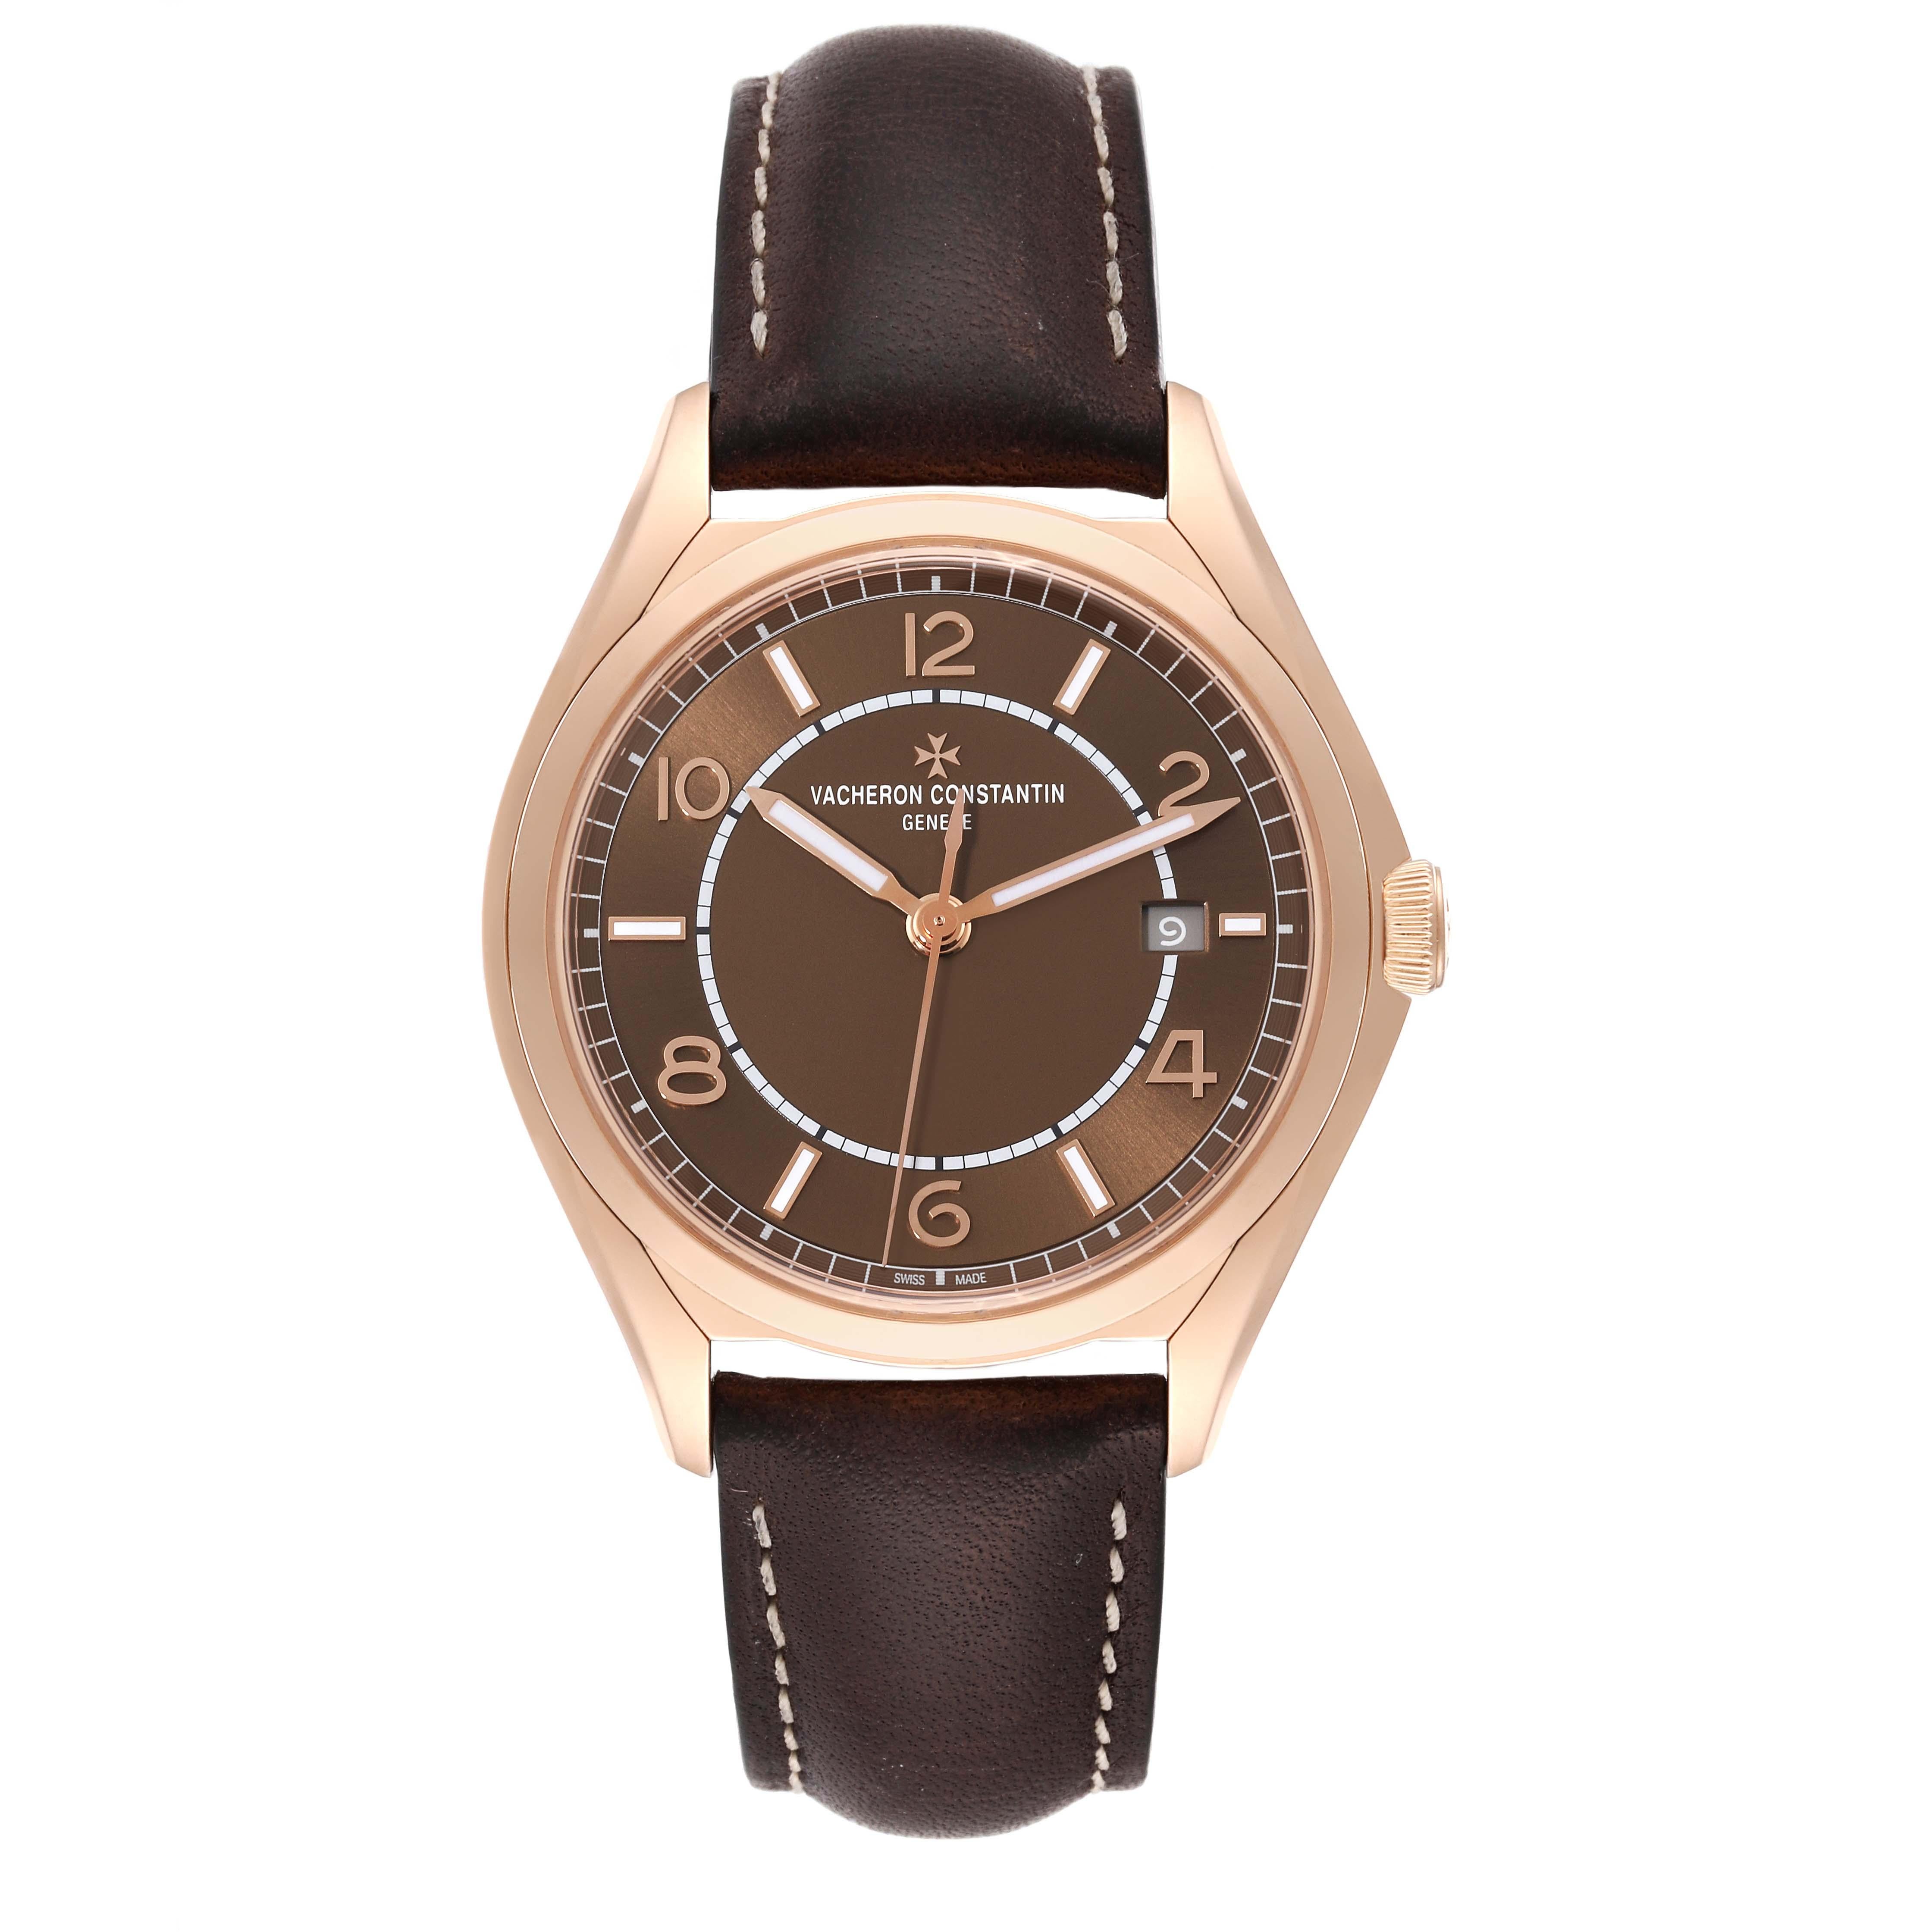 Vacheron Constantin Fifty Six Brown Dial Rose Gold Mens Watch 4600E Box Card. Automatic self-winding movement. 18k rose gold case 40 mm in diameter.  Thickness 9.6 mm. Transparent exhibition sapphire crystal caseback. 18k rose gold smooth bezel.